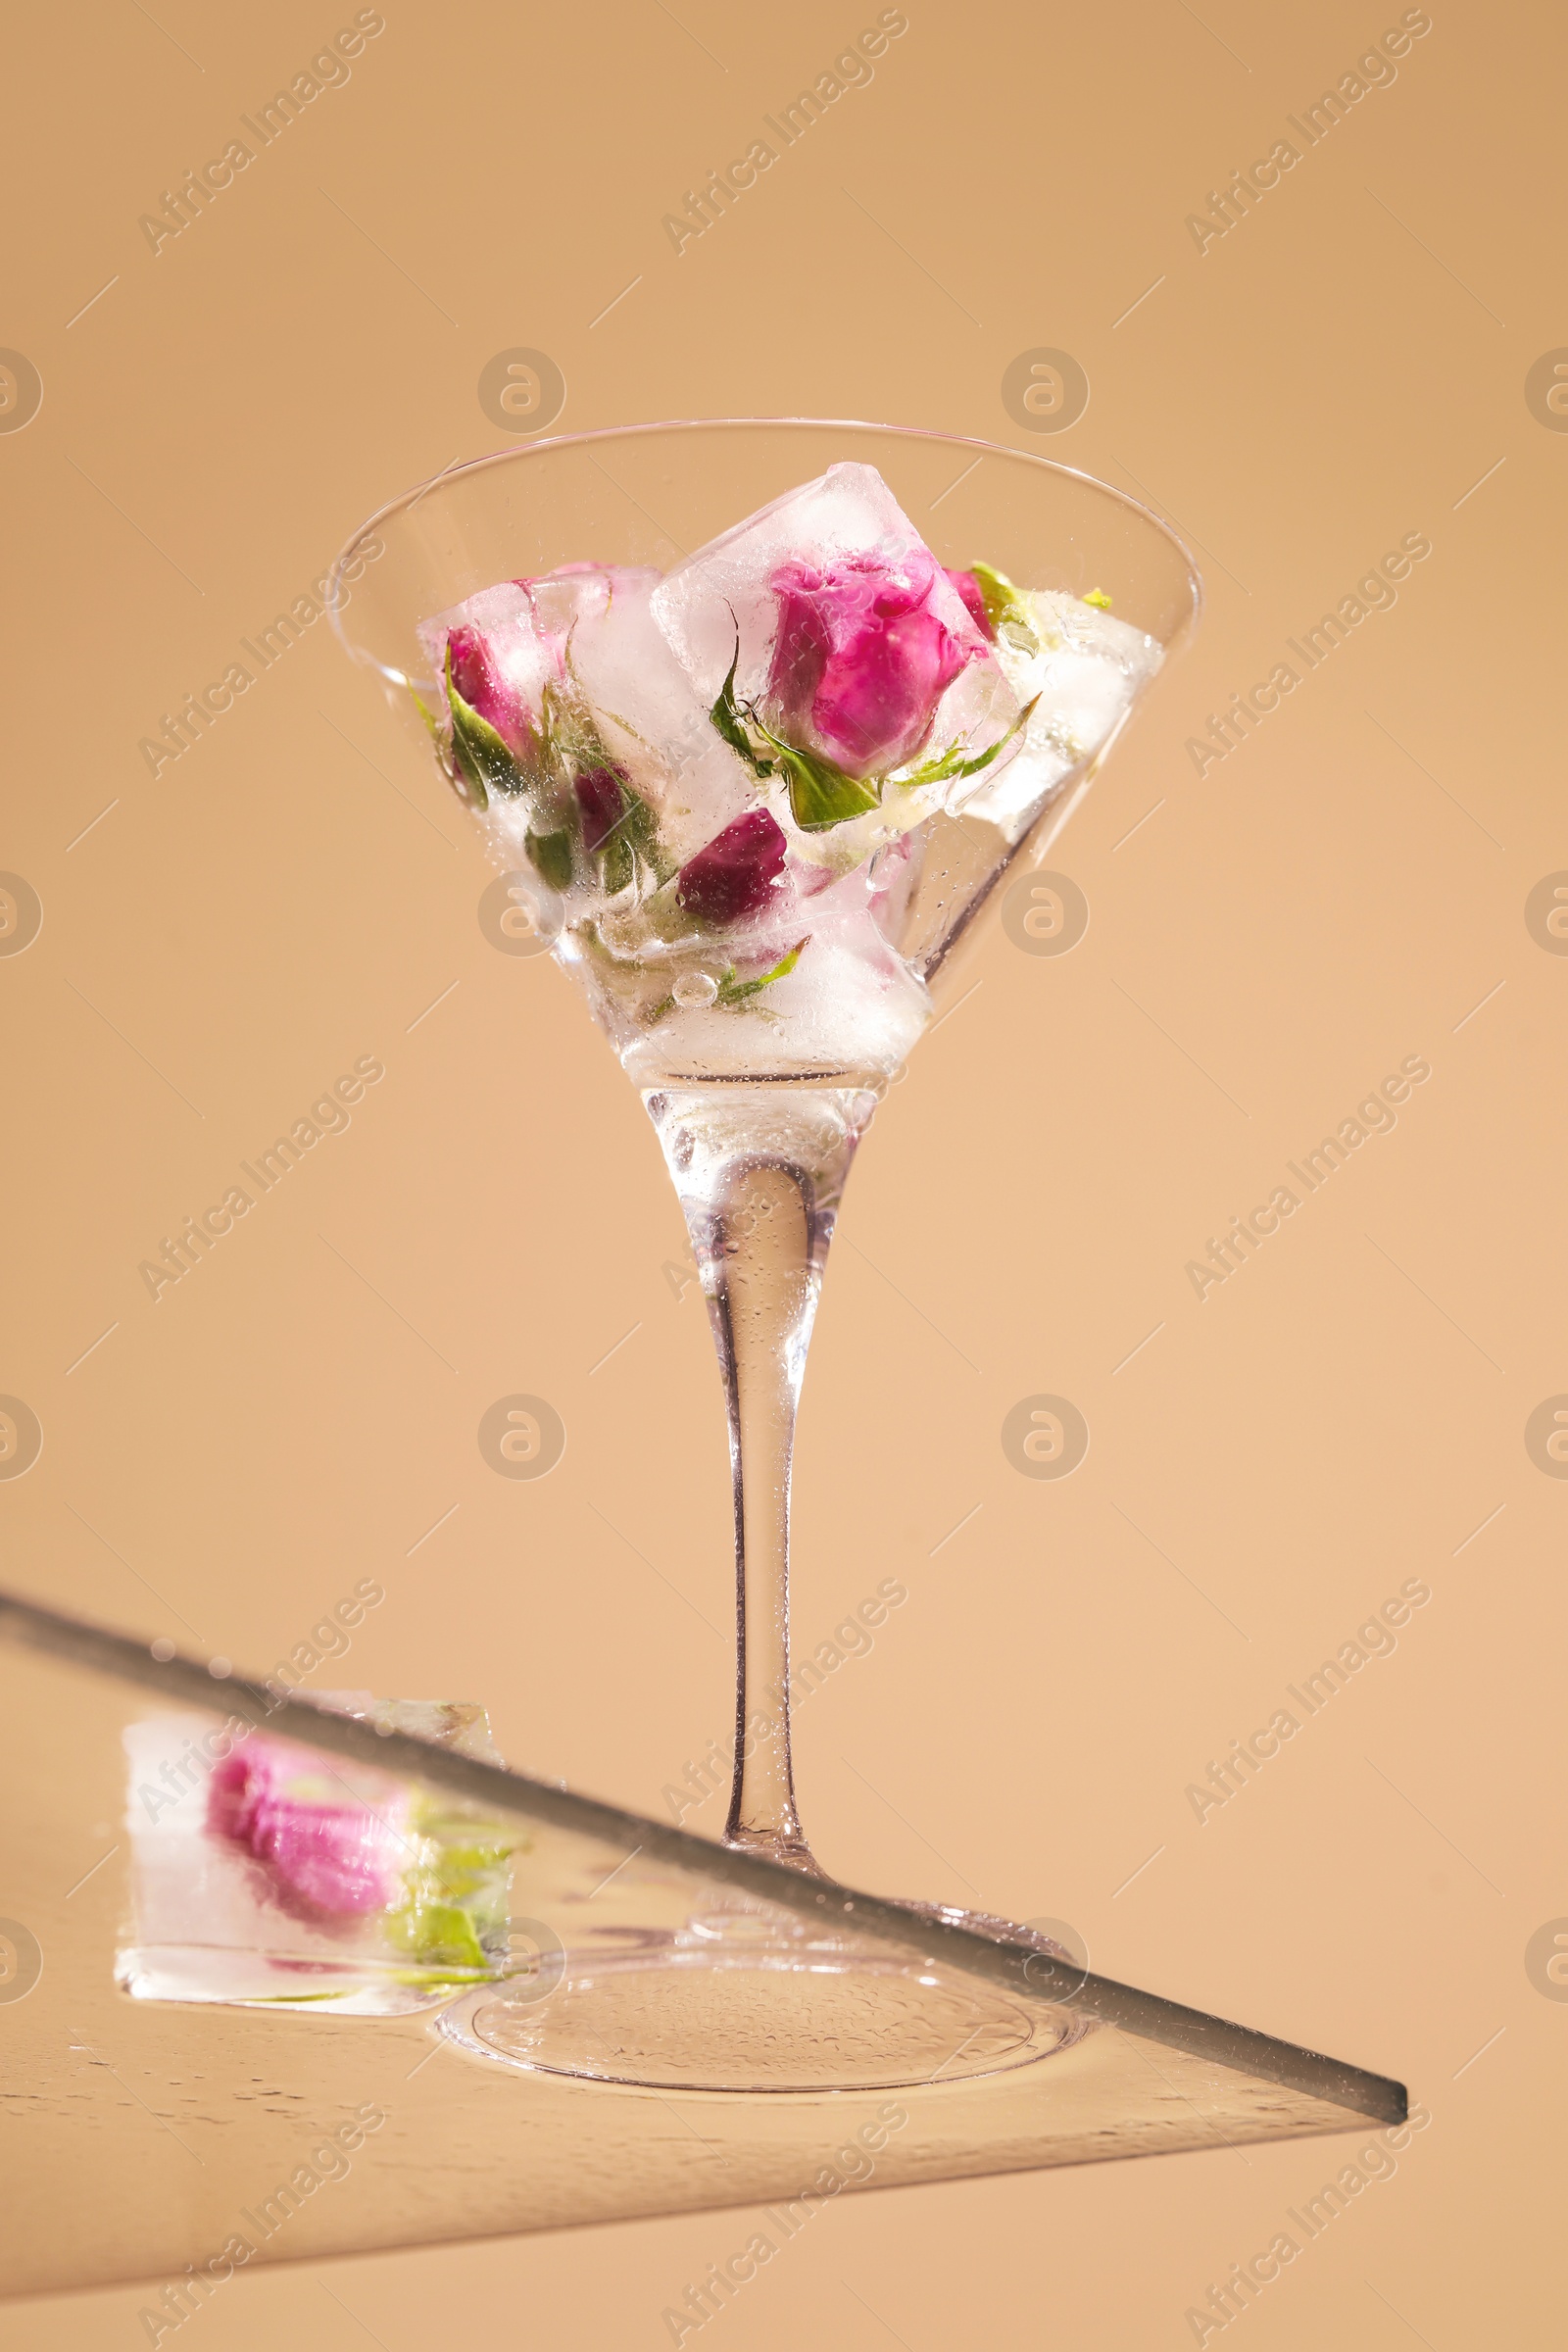 Photo of Ice cubes with frozen flowers in martini glass on table against beige background, low angle view